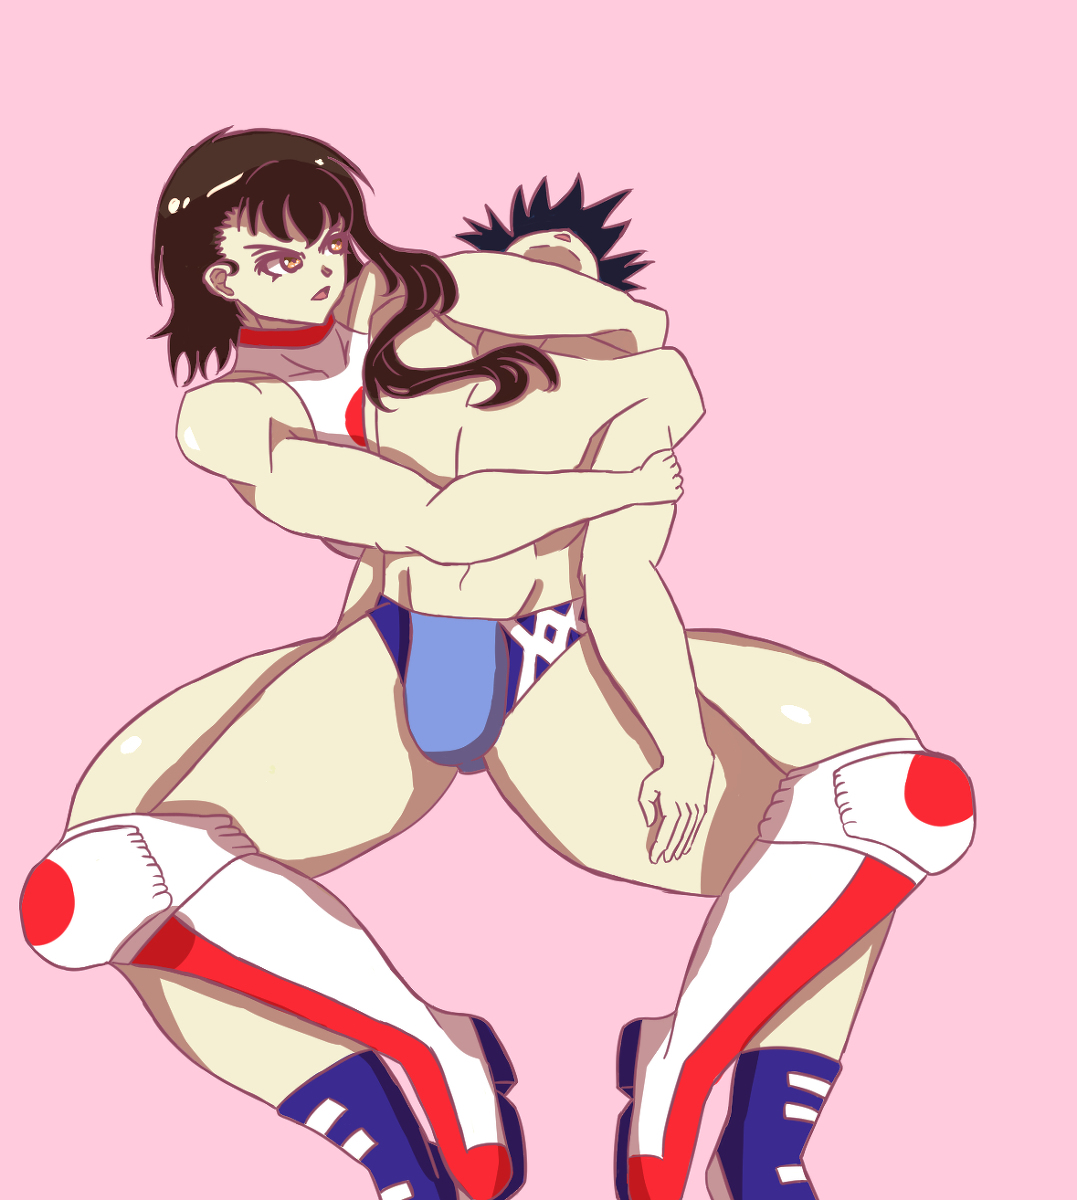 WhiteCawfeee COMMS CLOSED on X: Mixed Wrestling #プロレス #Nisekoi #ミックスファイト  #技絵 t.coQSoKd66Y7r t.cooTmxxt6n8k  X